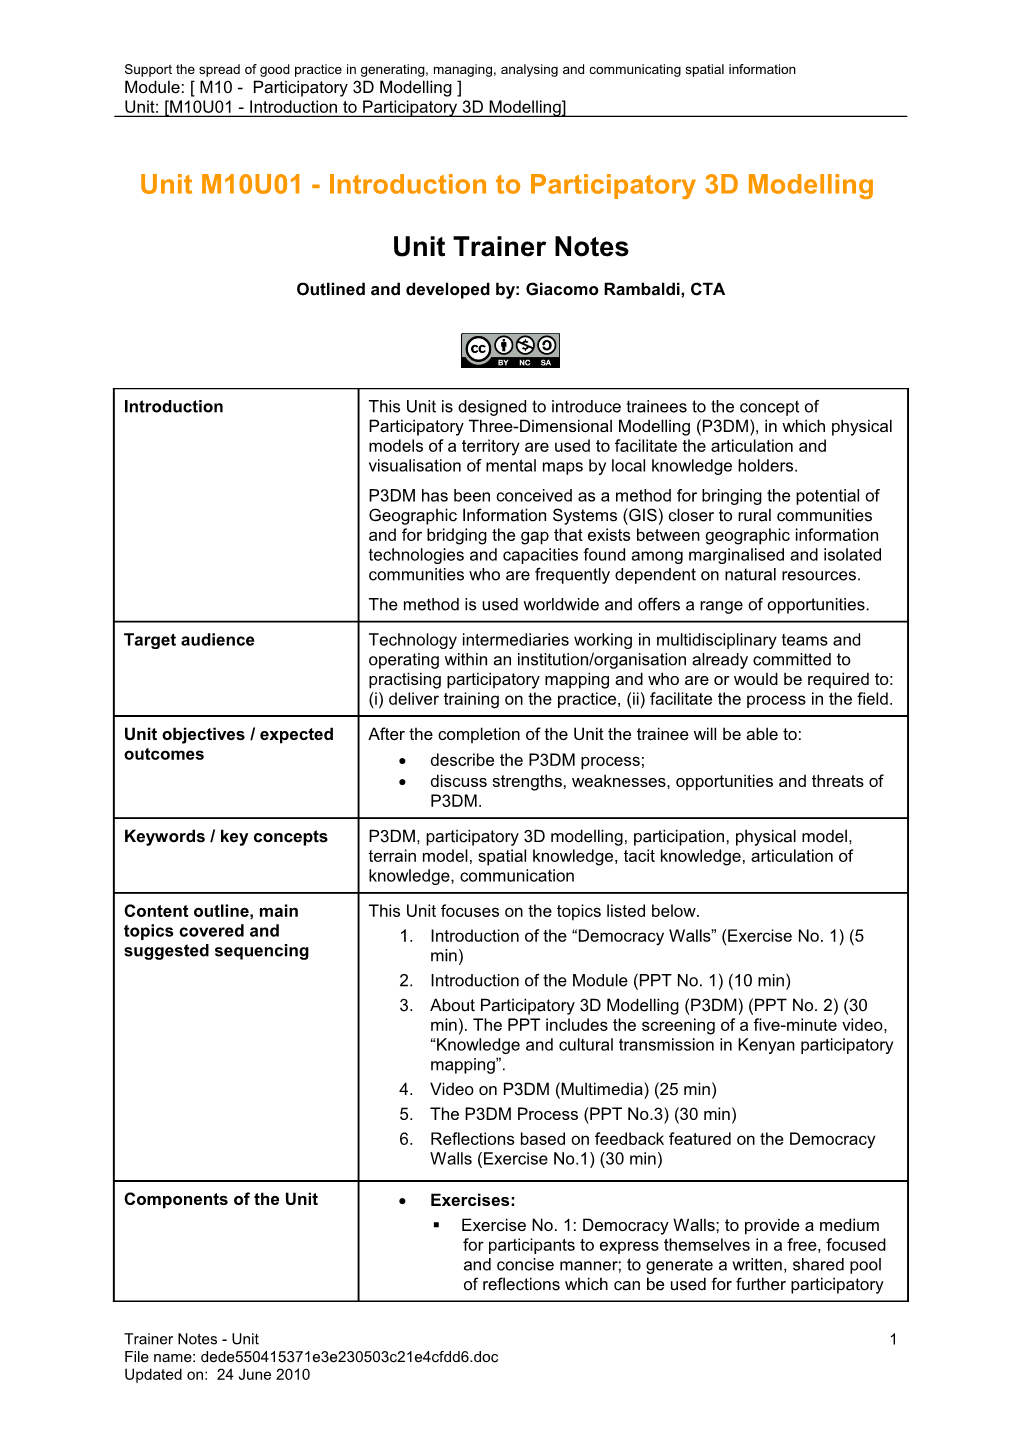 Unit Trainer Notes - Introduction to Participatory 3D Modelling